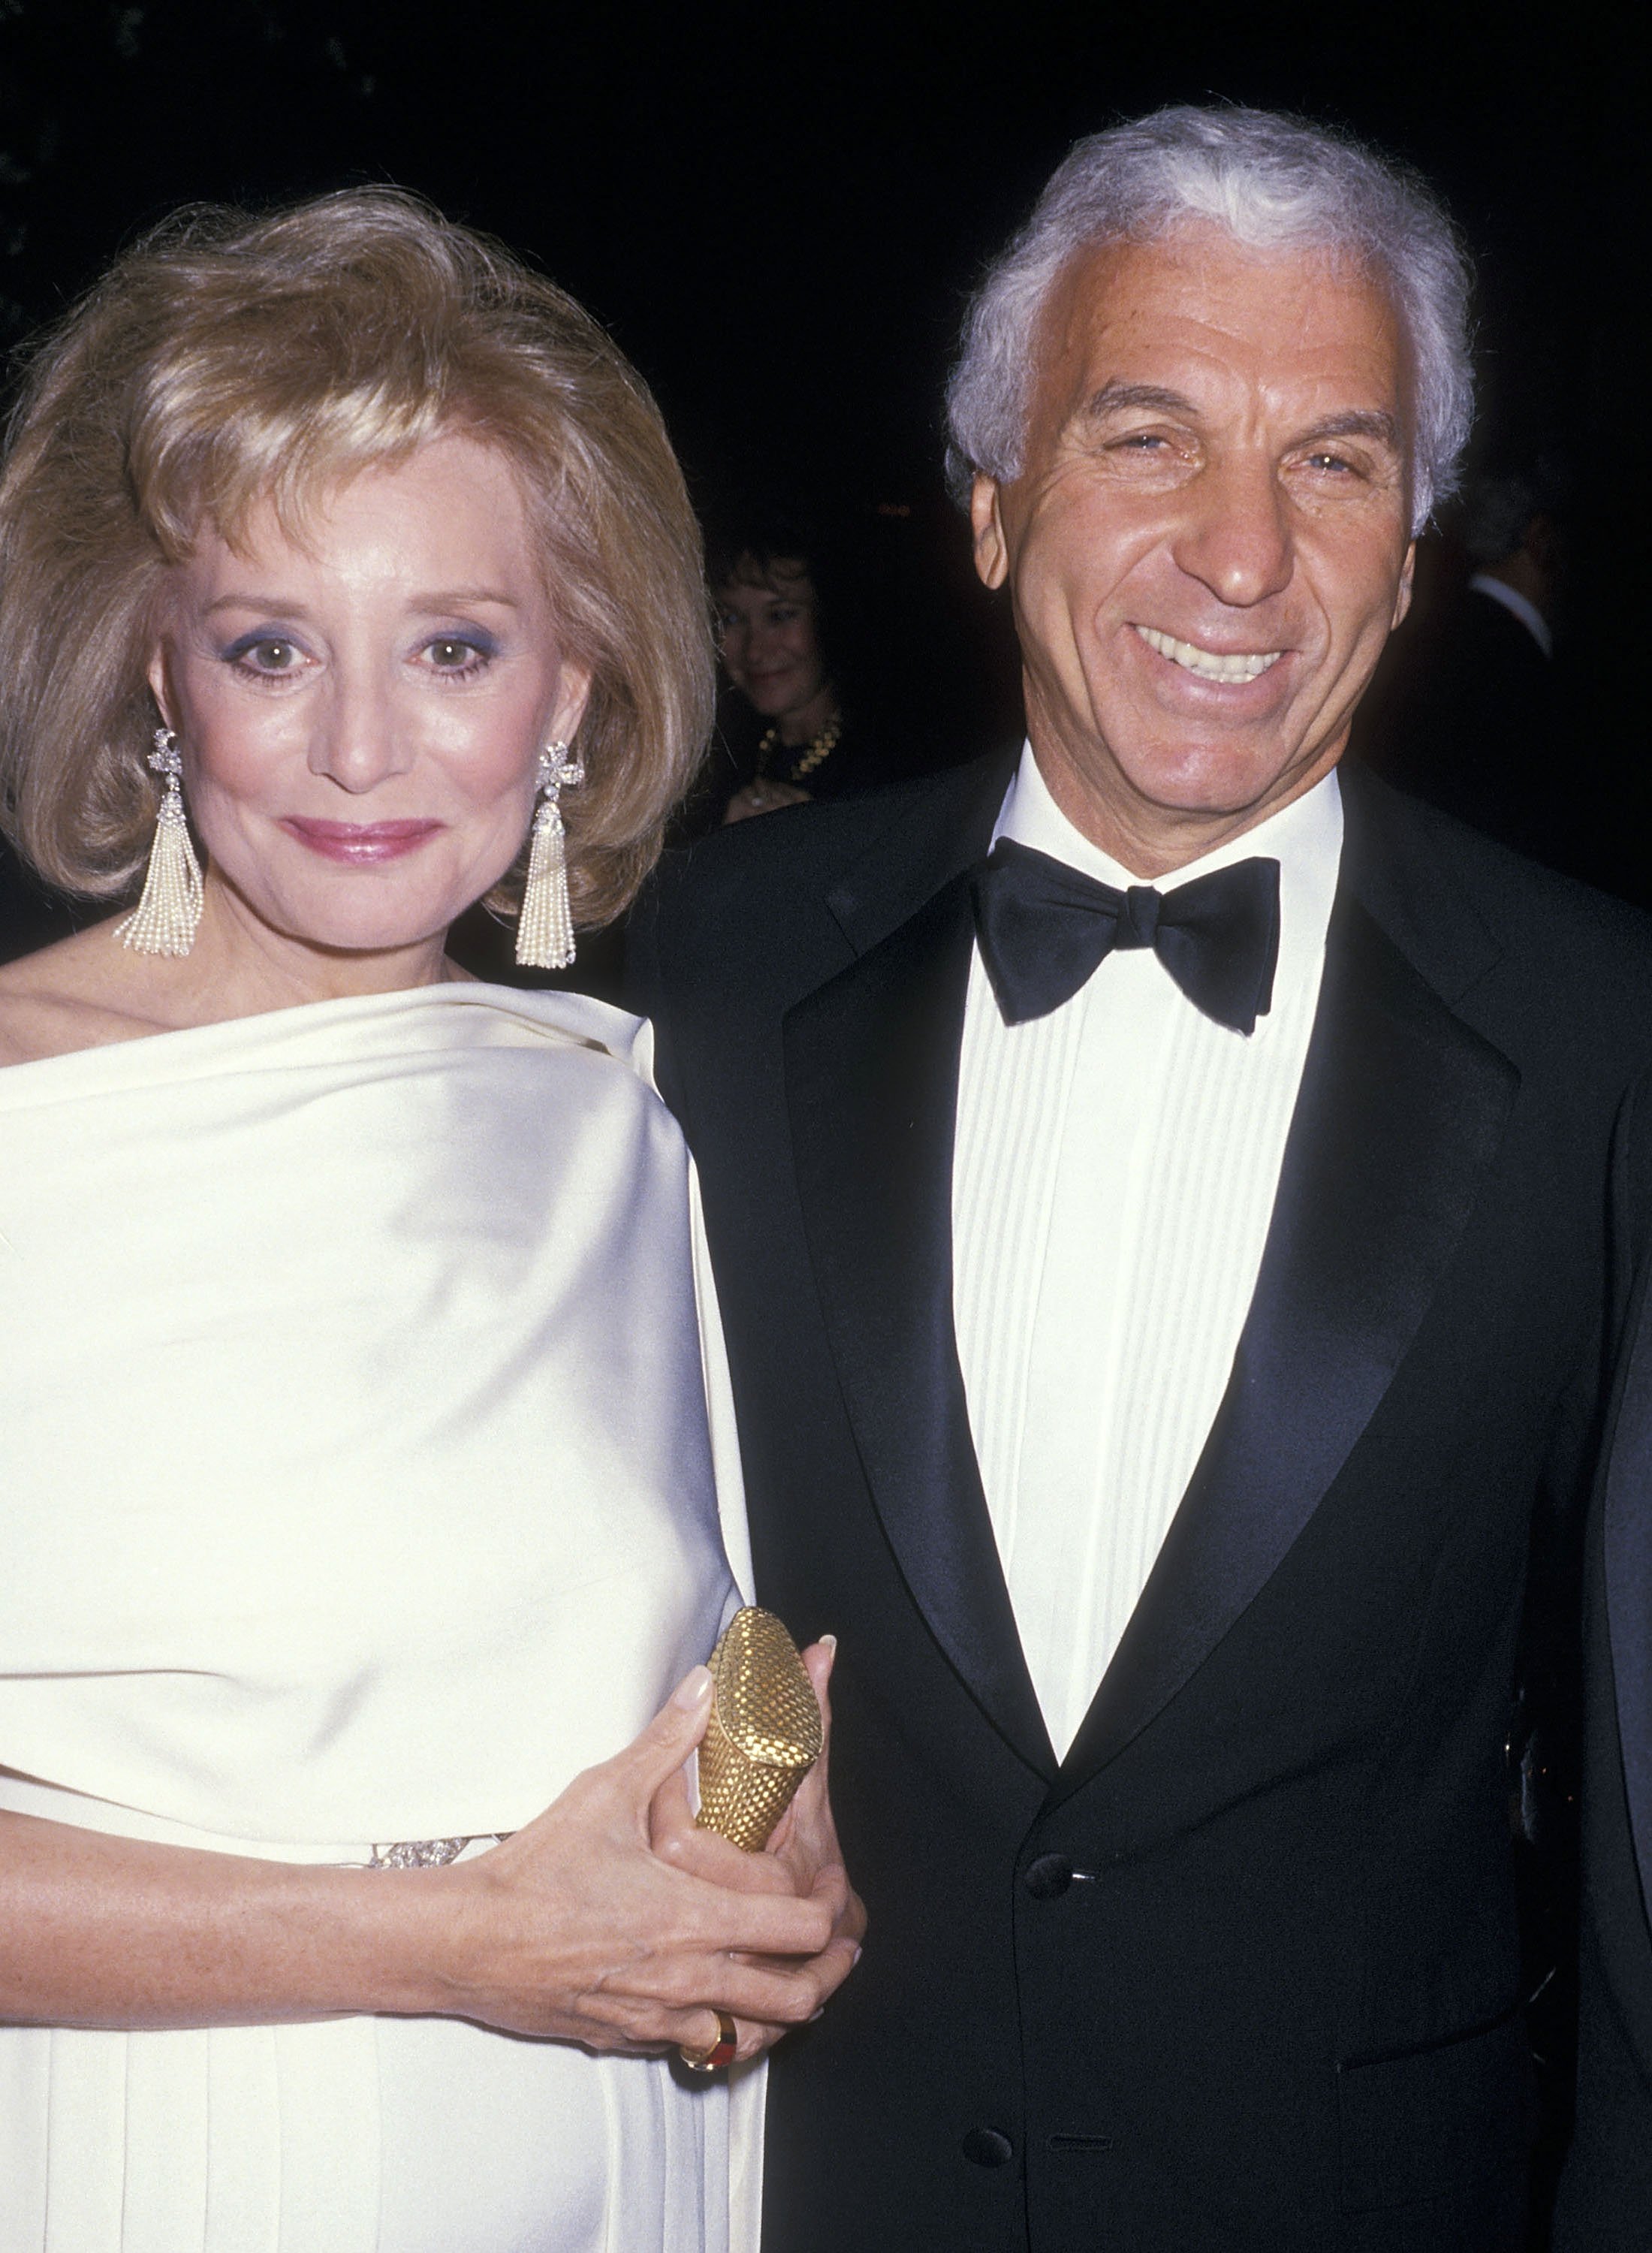 TV journalist Barbara Walters and entertainment executive Merv Adelson at "The Ten Treasures" Opening Night Exhibition Gala on May 19, 1988 at the New York Public Library, 42nd Street in New York City.  | Source: Getty Images